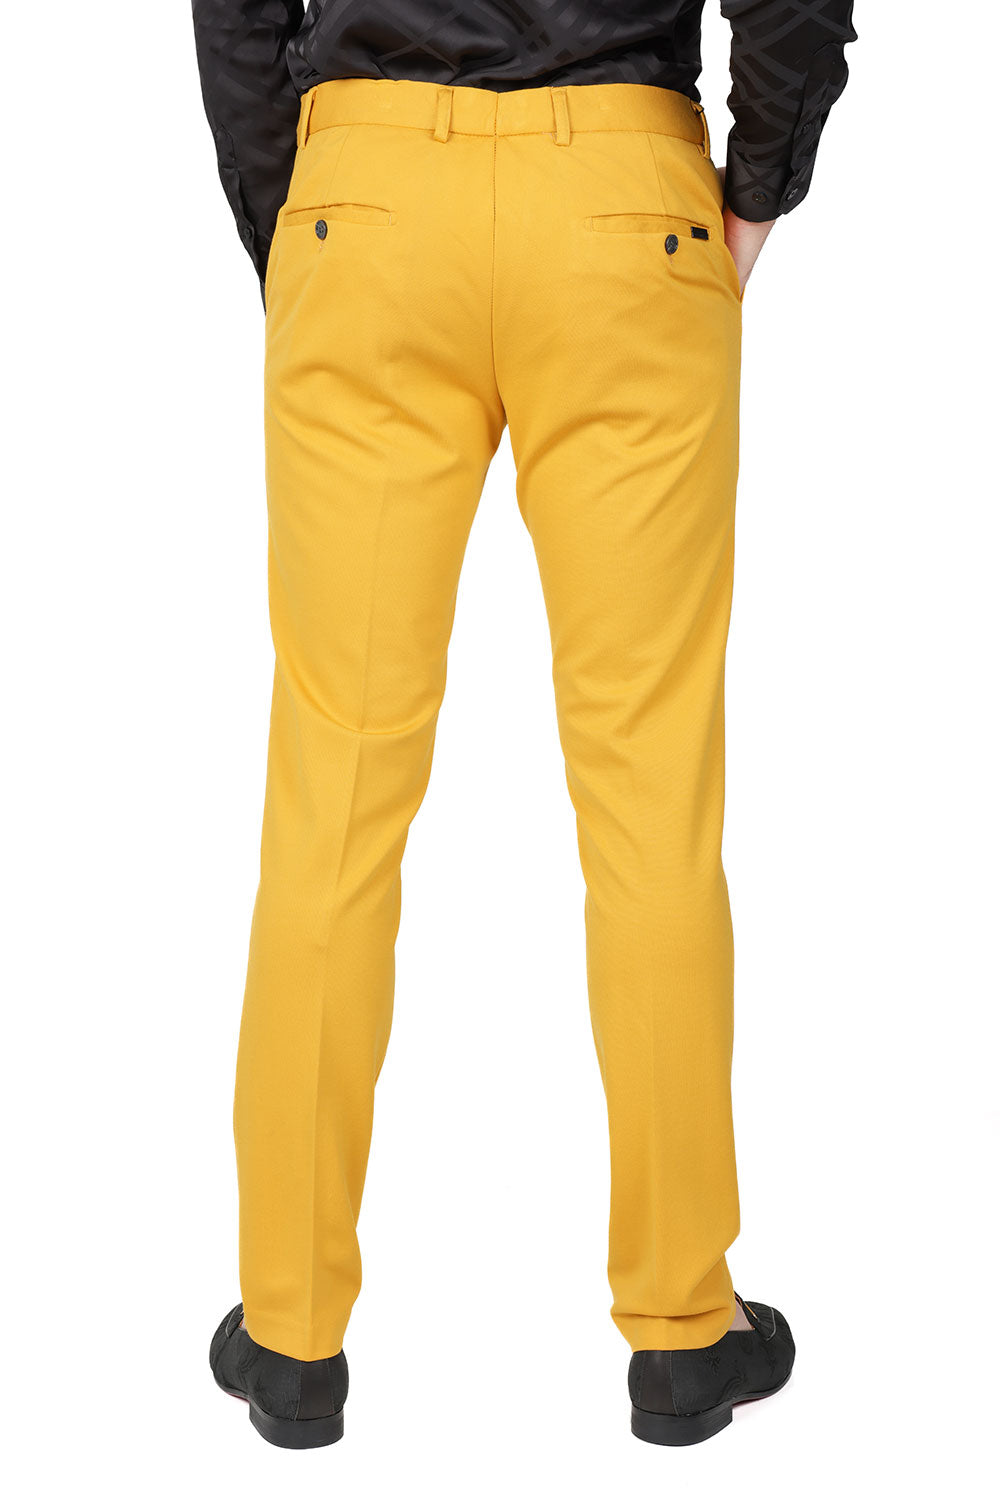 Barabas Men's Solid Color Essential Chino Dress Stretch Pants CP4007 Mustard